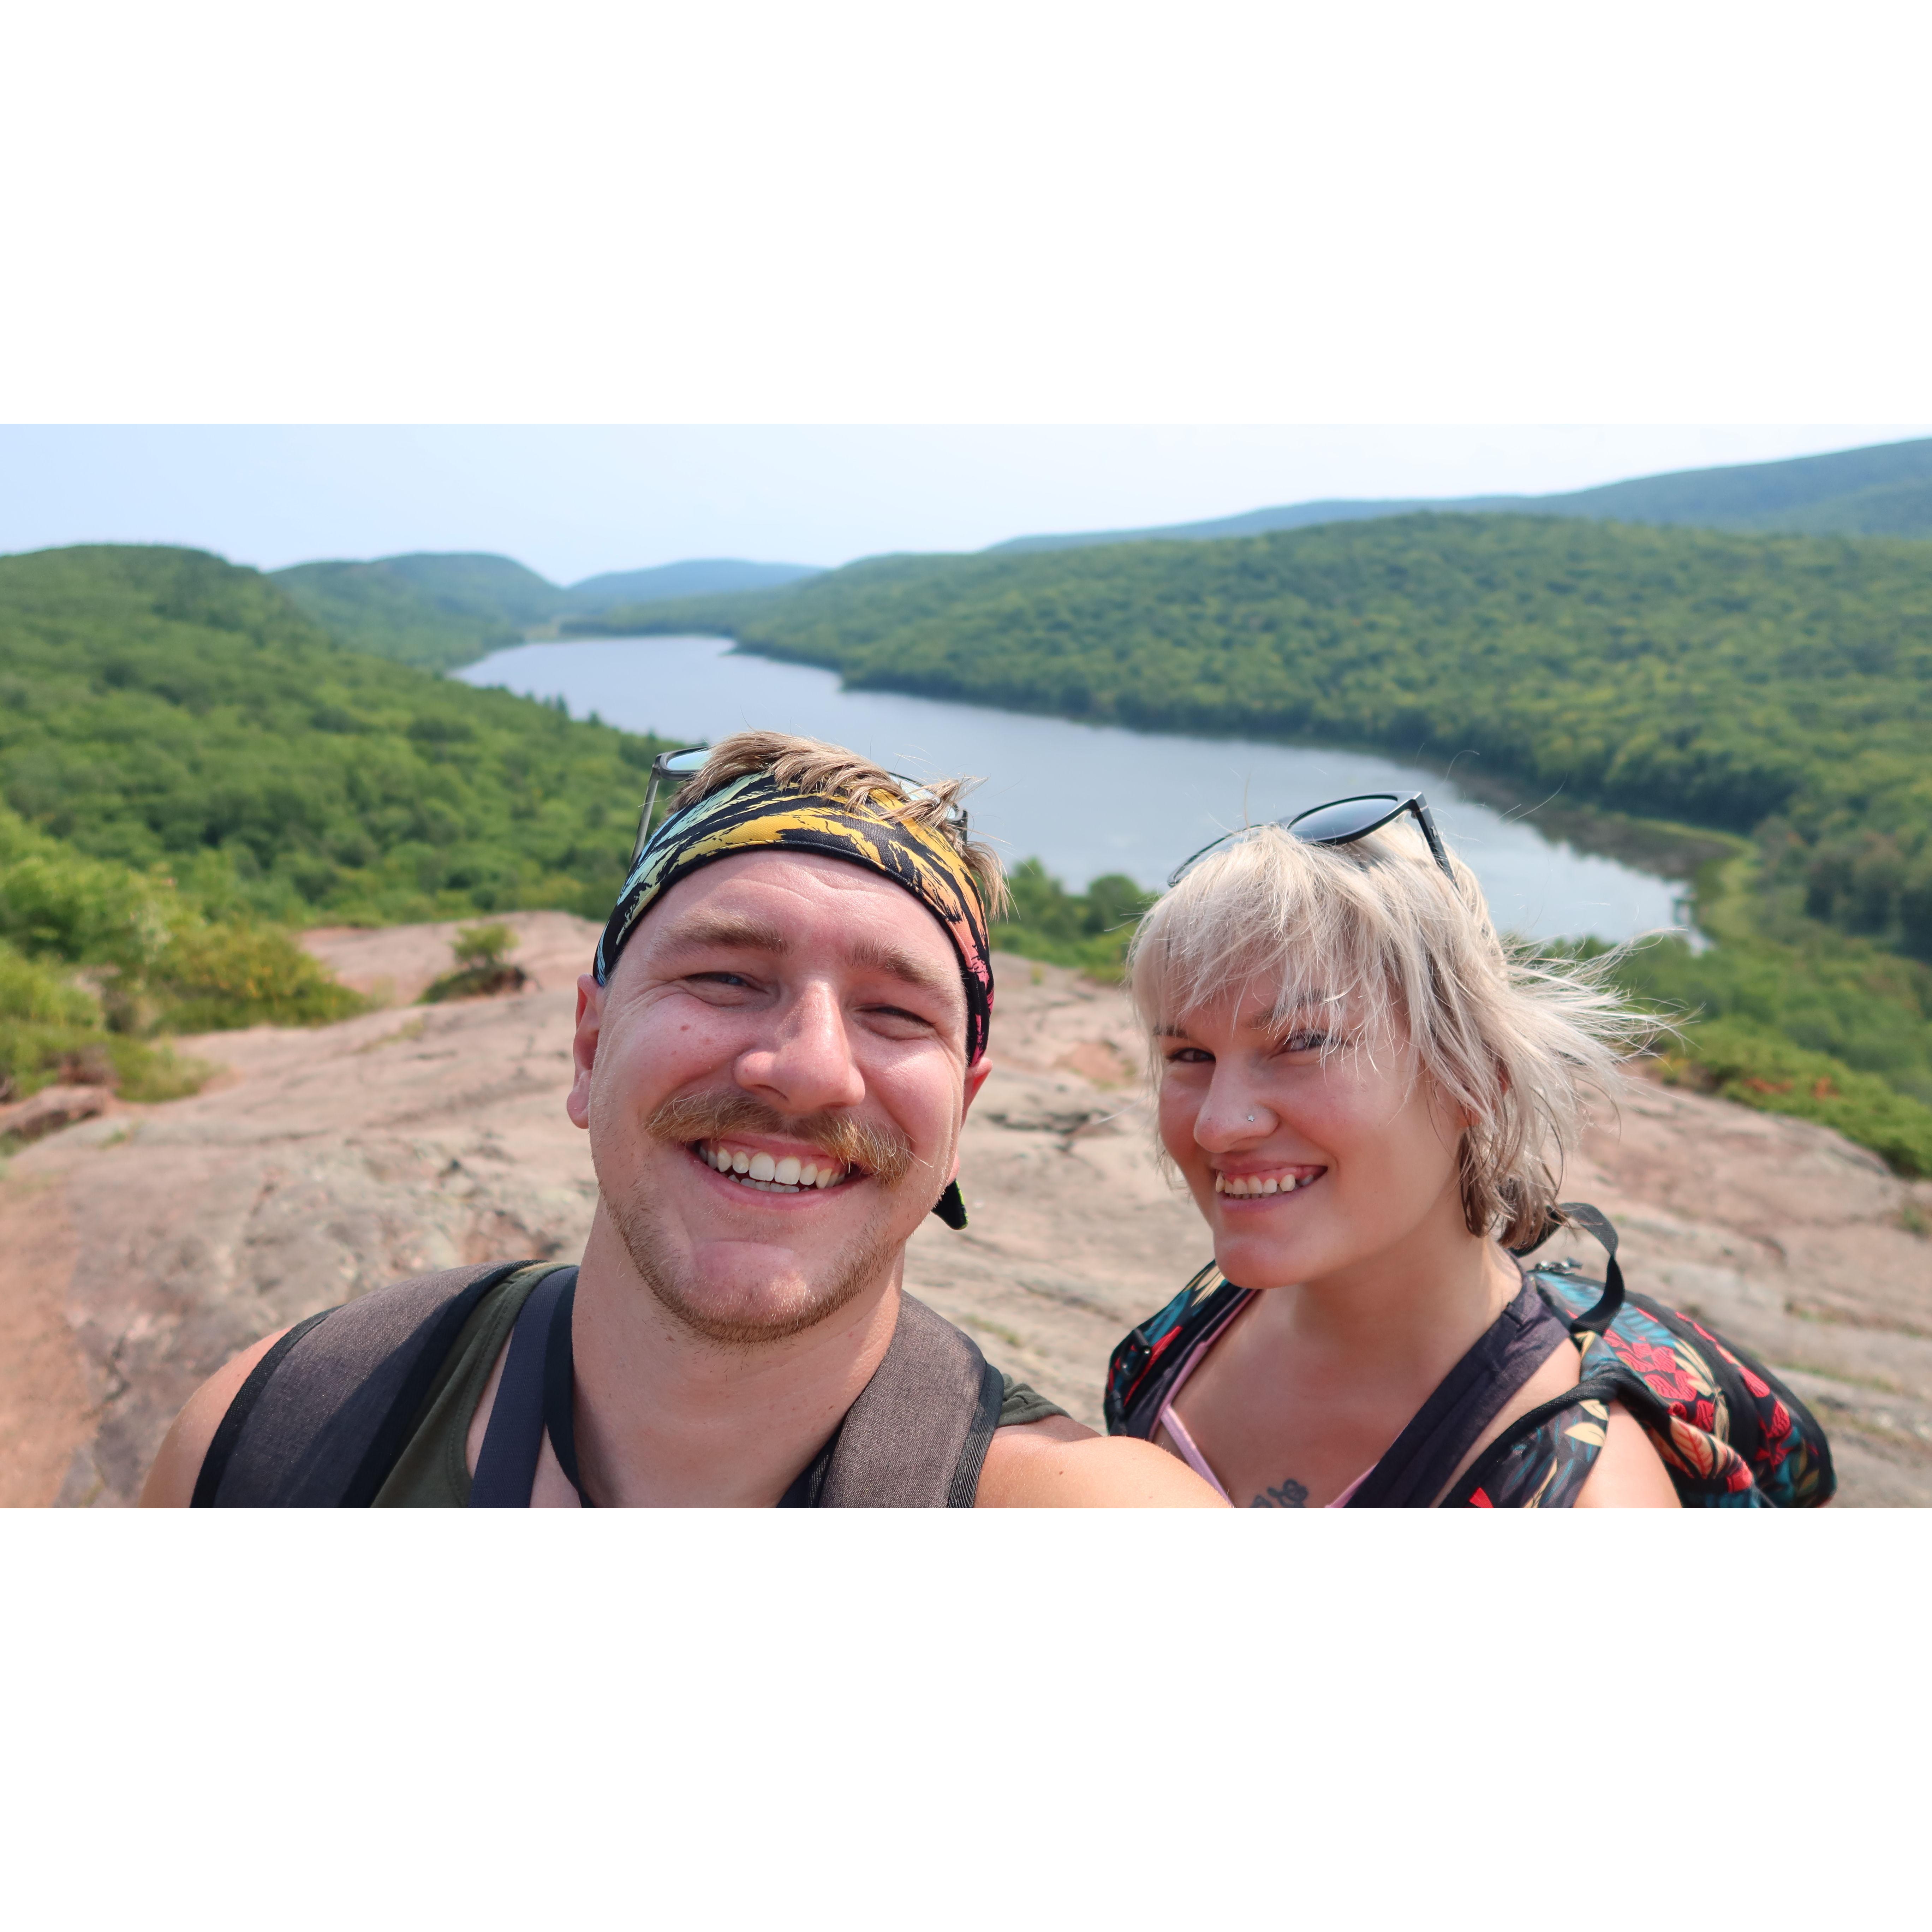 Our trip to the Porcupine Mountains with Lake of the Clouds behind us.